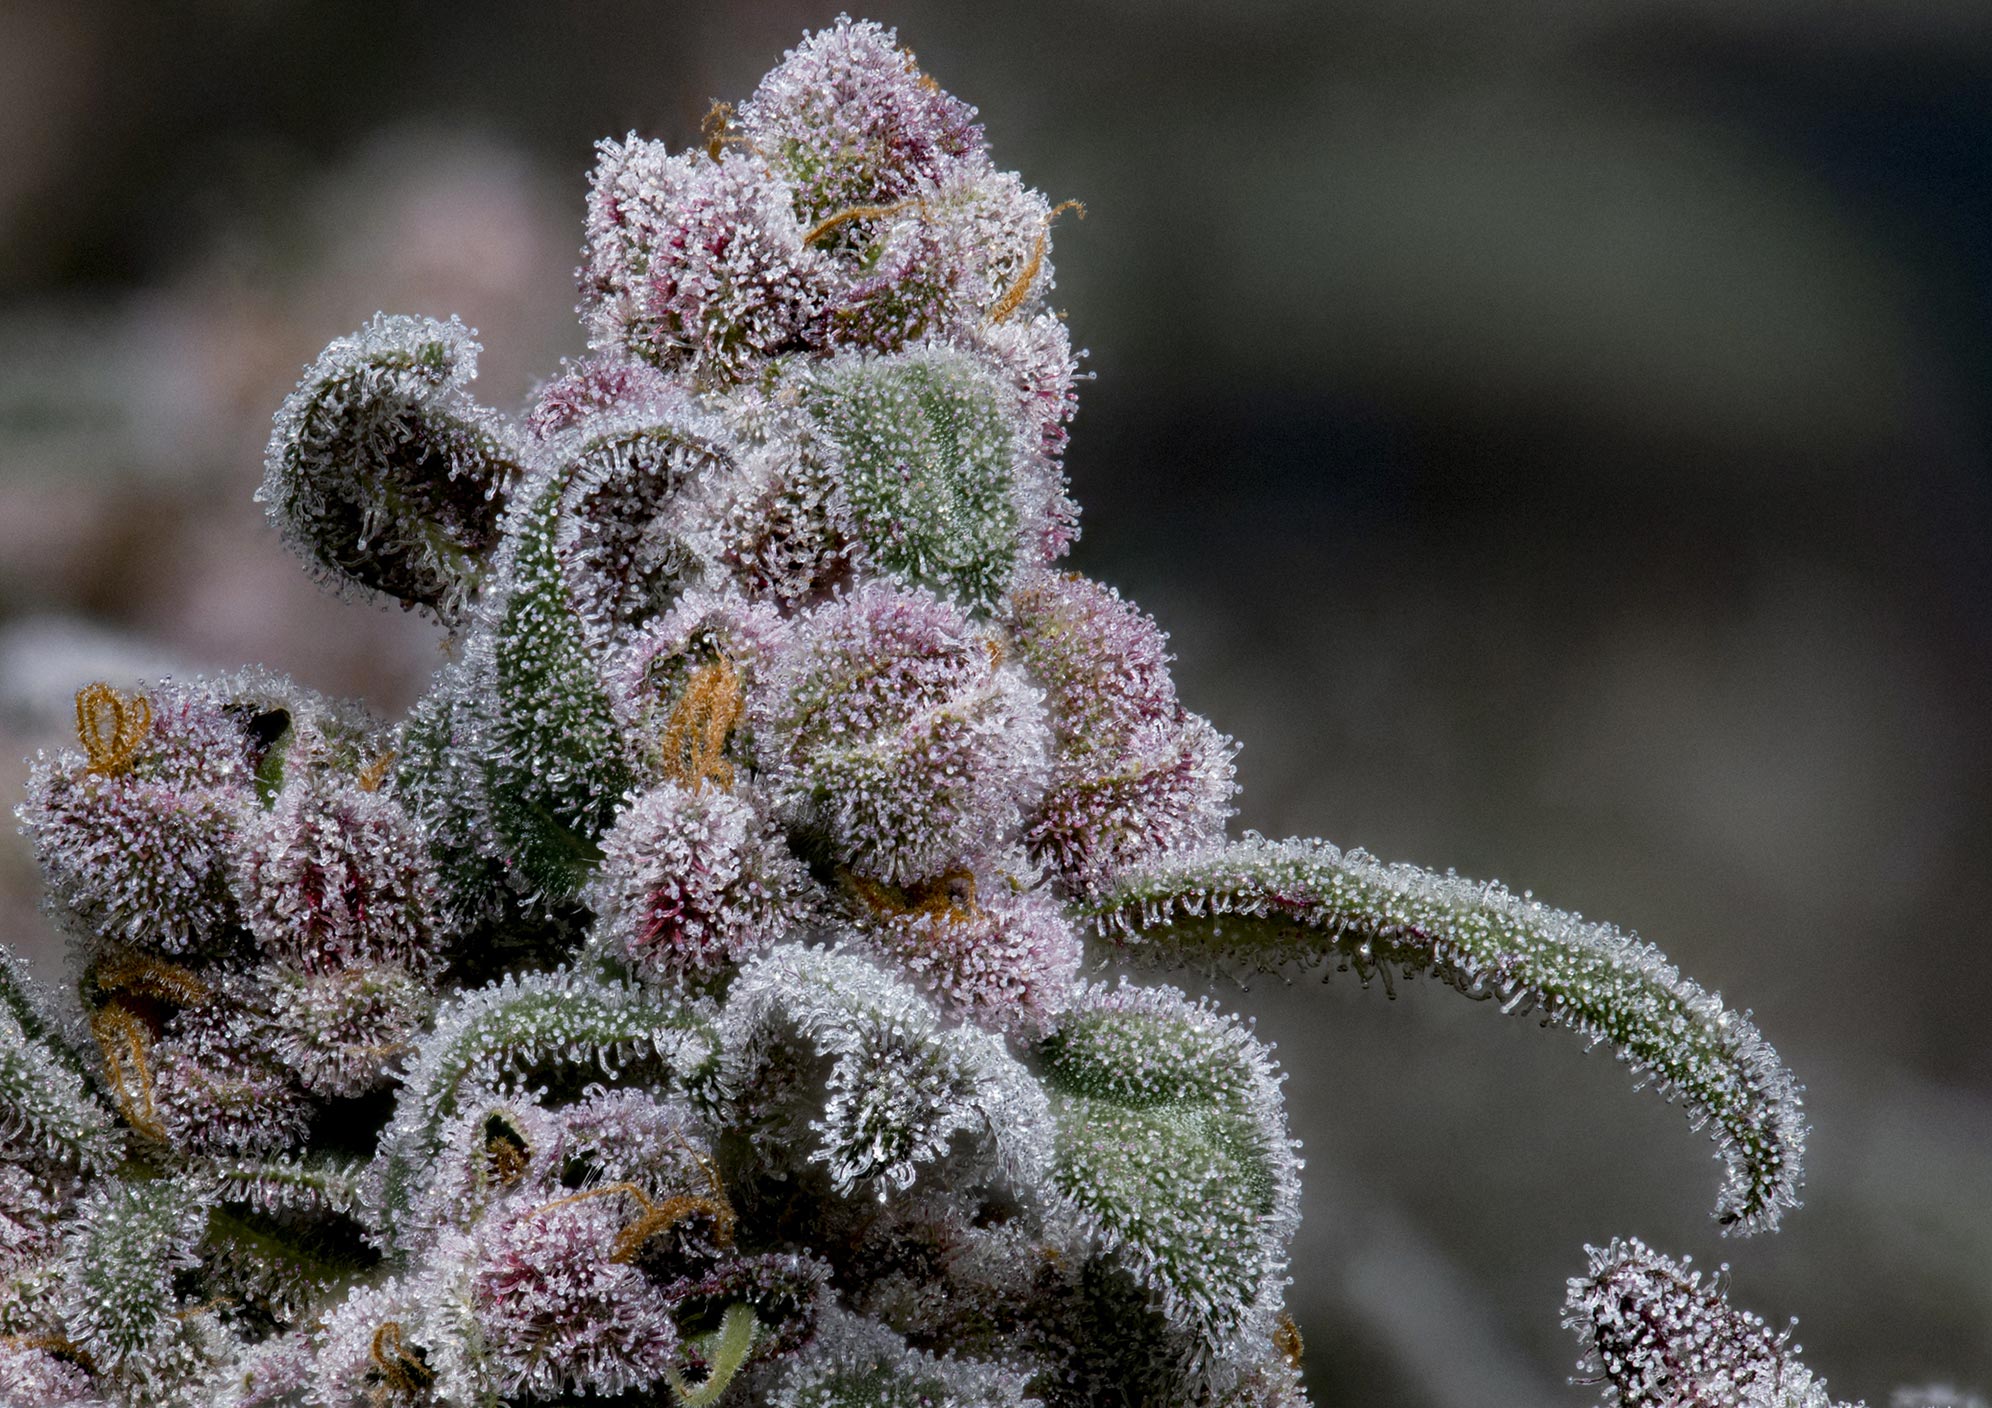 Close-up of Cookies flower showing macro view of trichomes